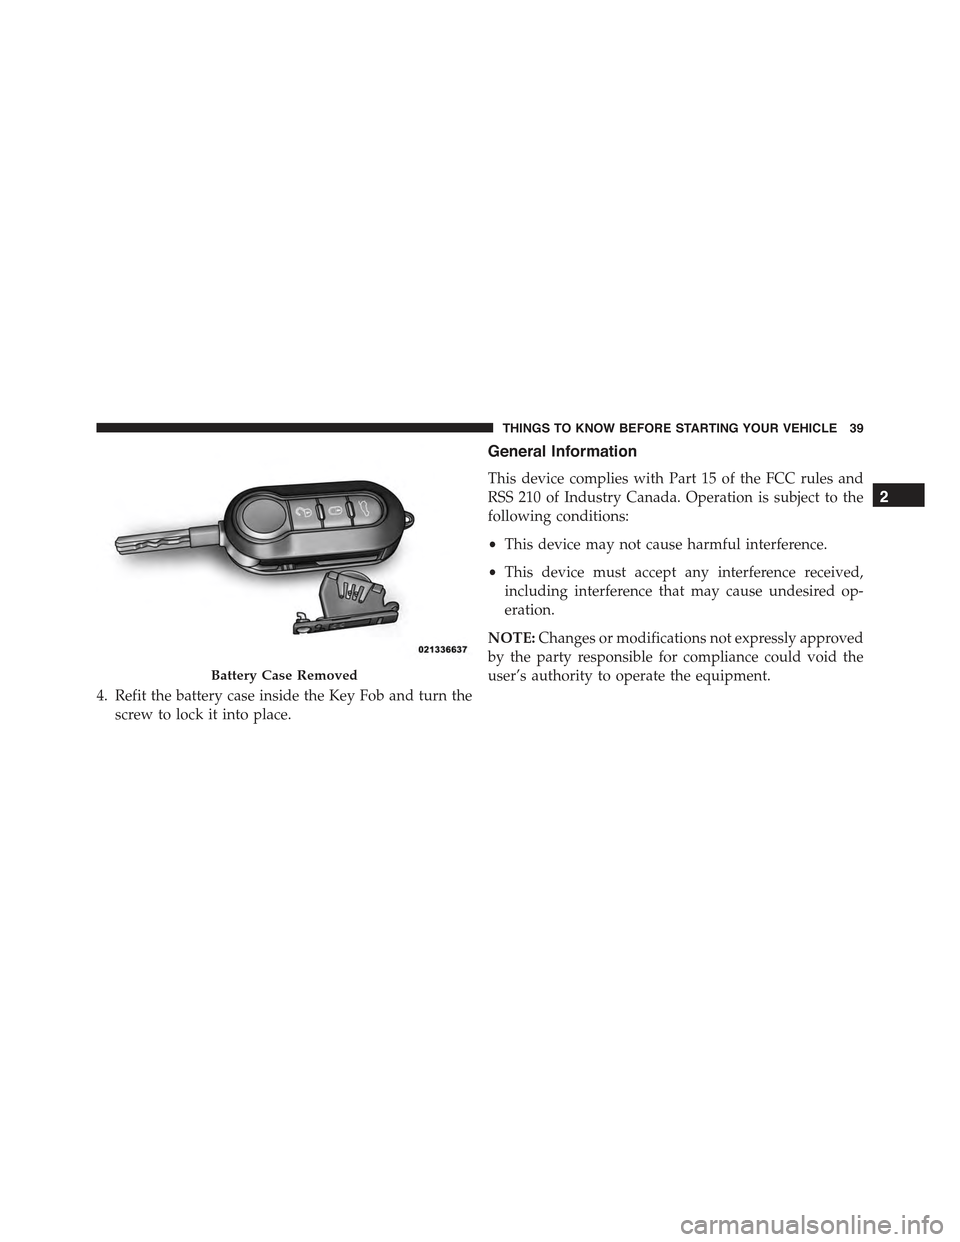 FIAT 500E 2015 2.G Owners Manual 4. Refit the battery case inside the Key Fob and turn the
screw to lock it into place.
General Information
This device complies with Part 15 of the FCC rules and
RSS 210 of Industry Canada. Operation 